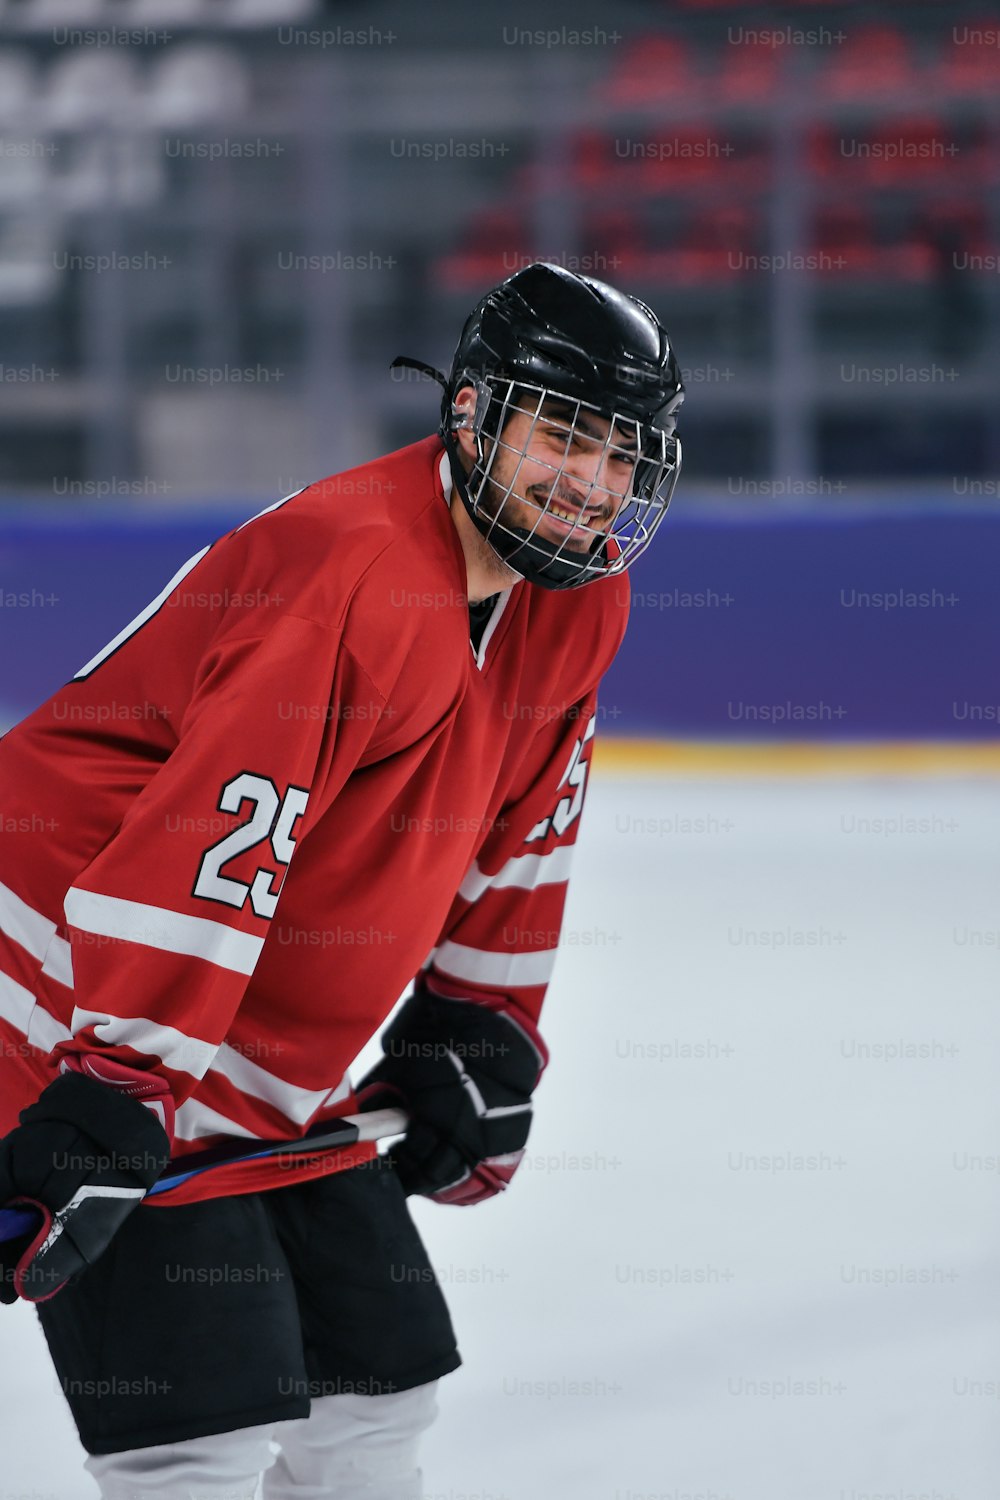 a hockey player in a red jersey on the ice